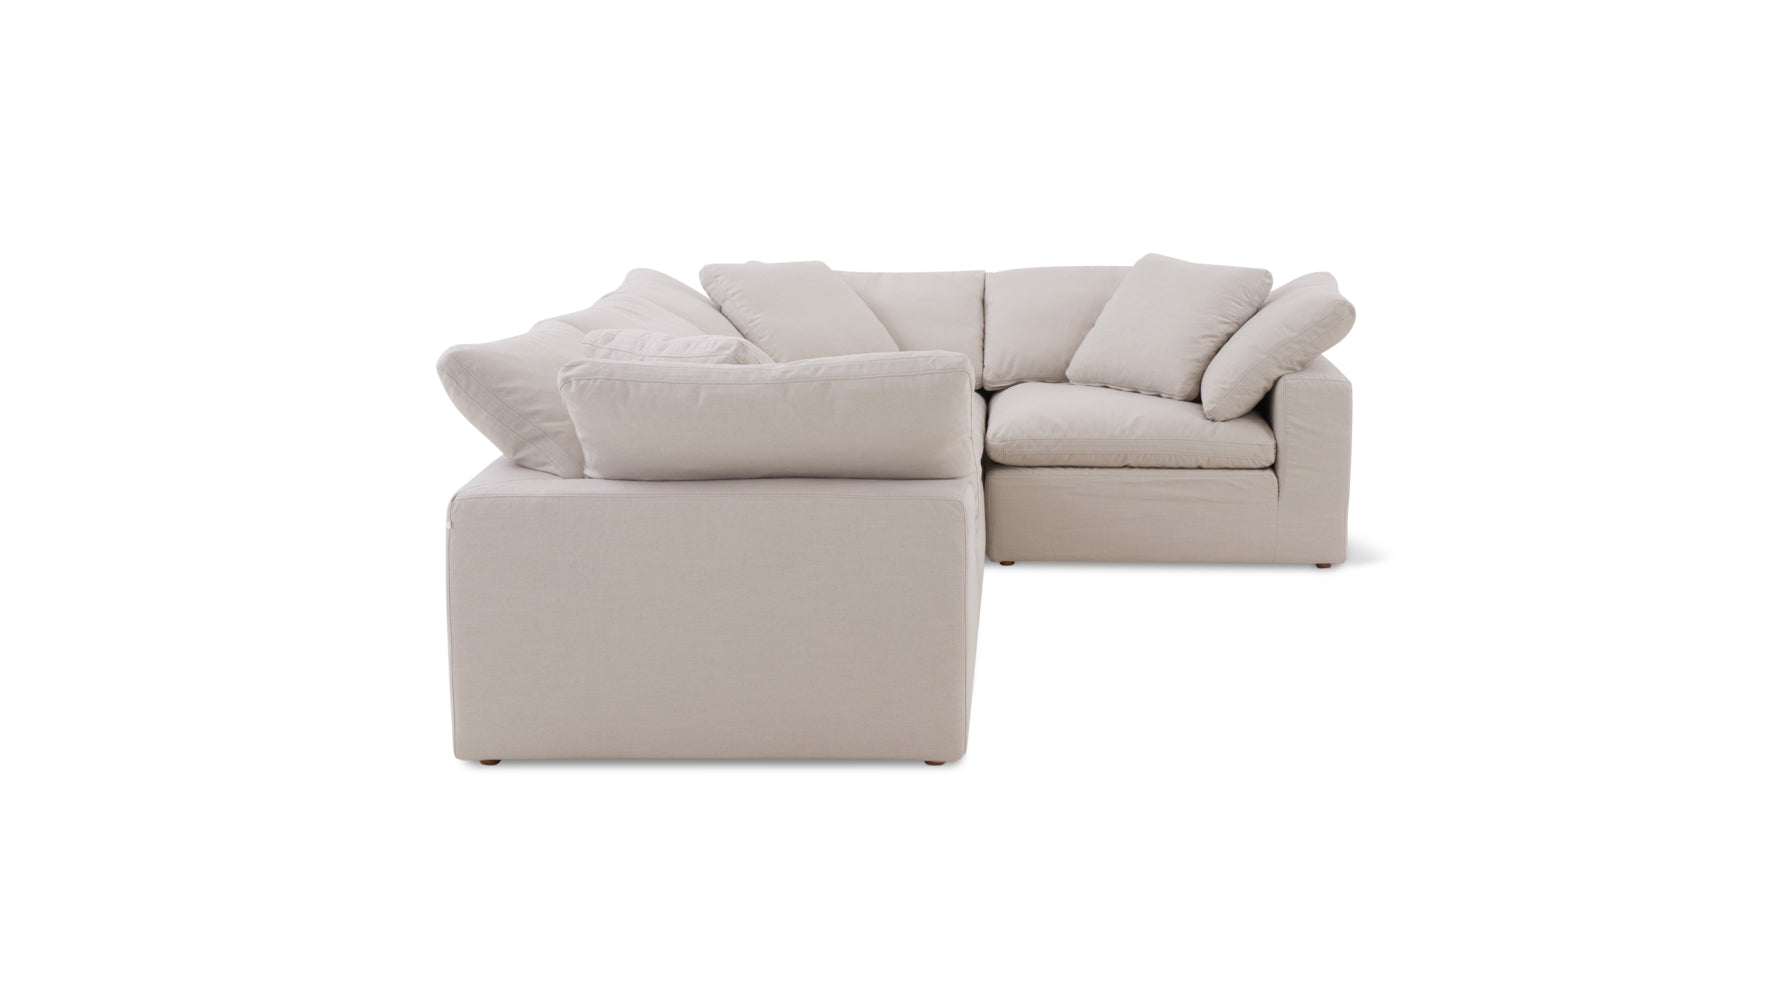 Movie Night™ 4-Piece Modular Sectional Closed, Large, Clay - Image 8